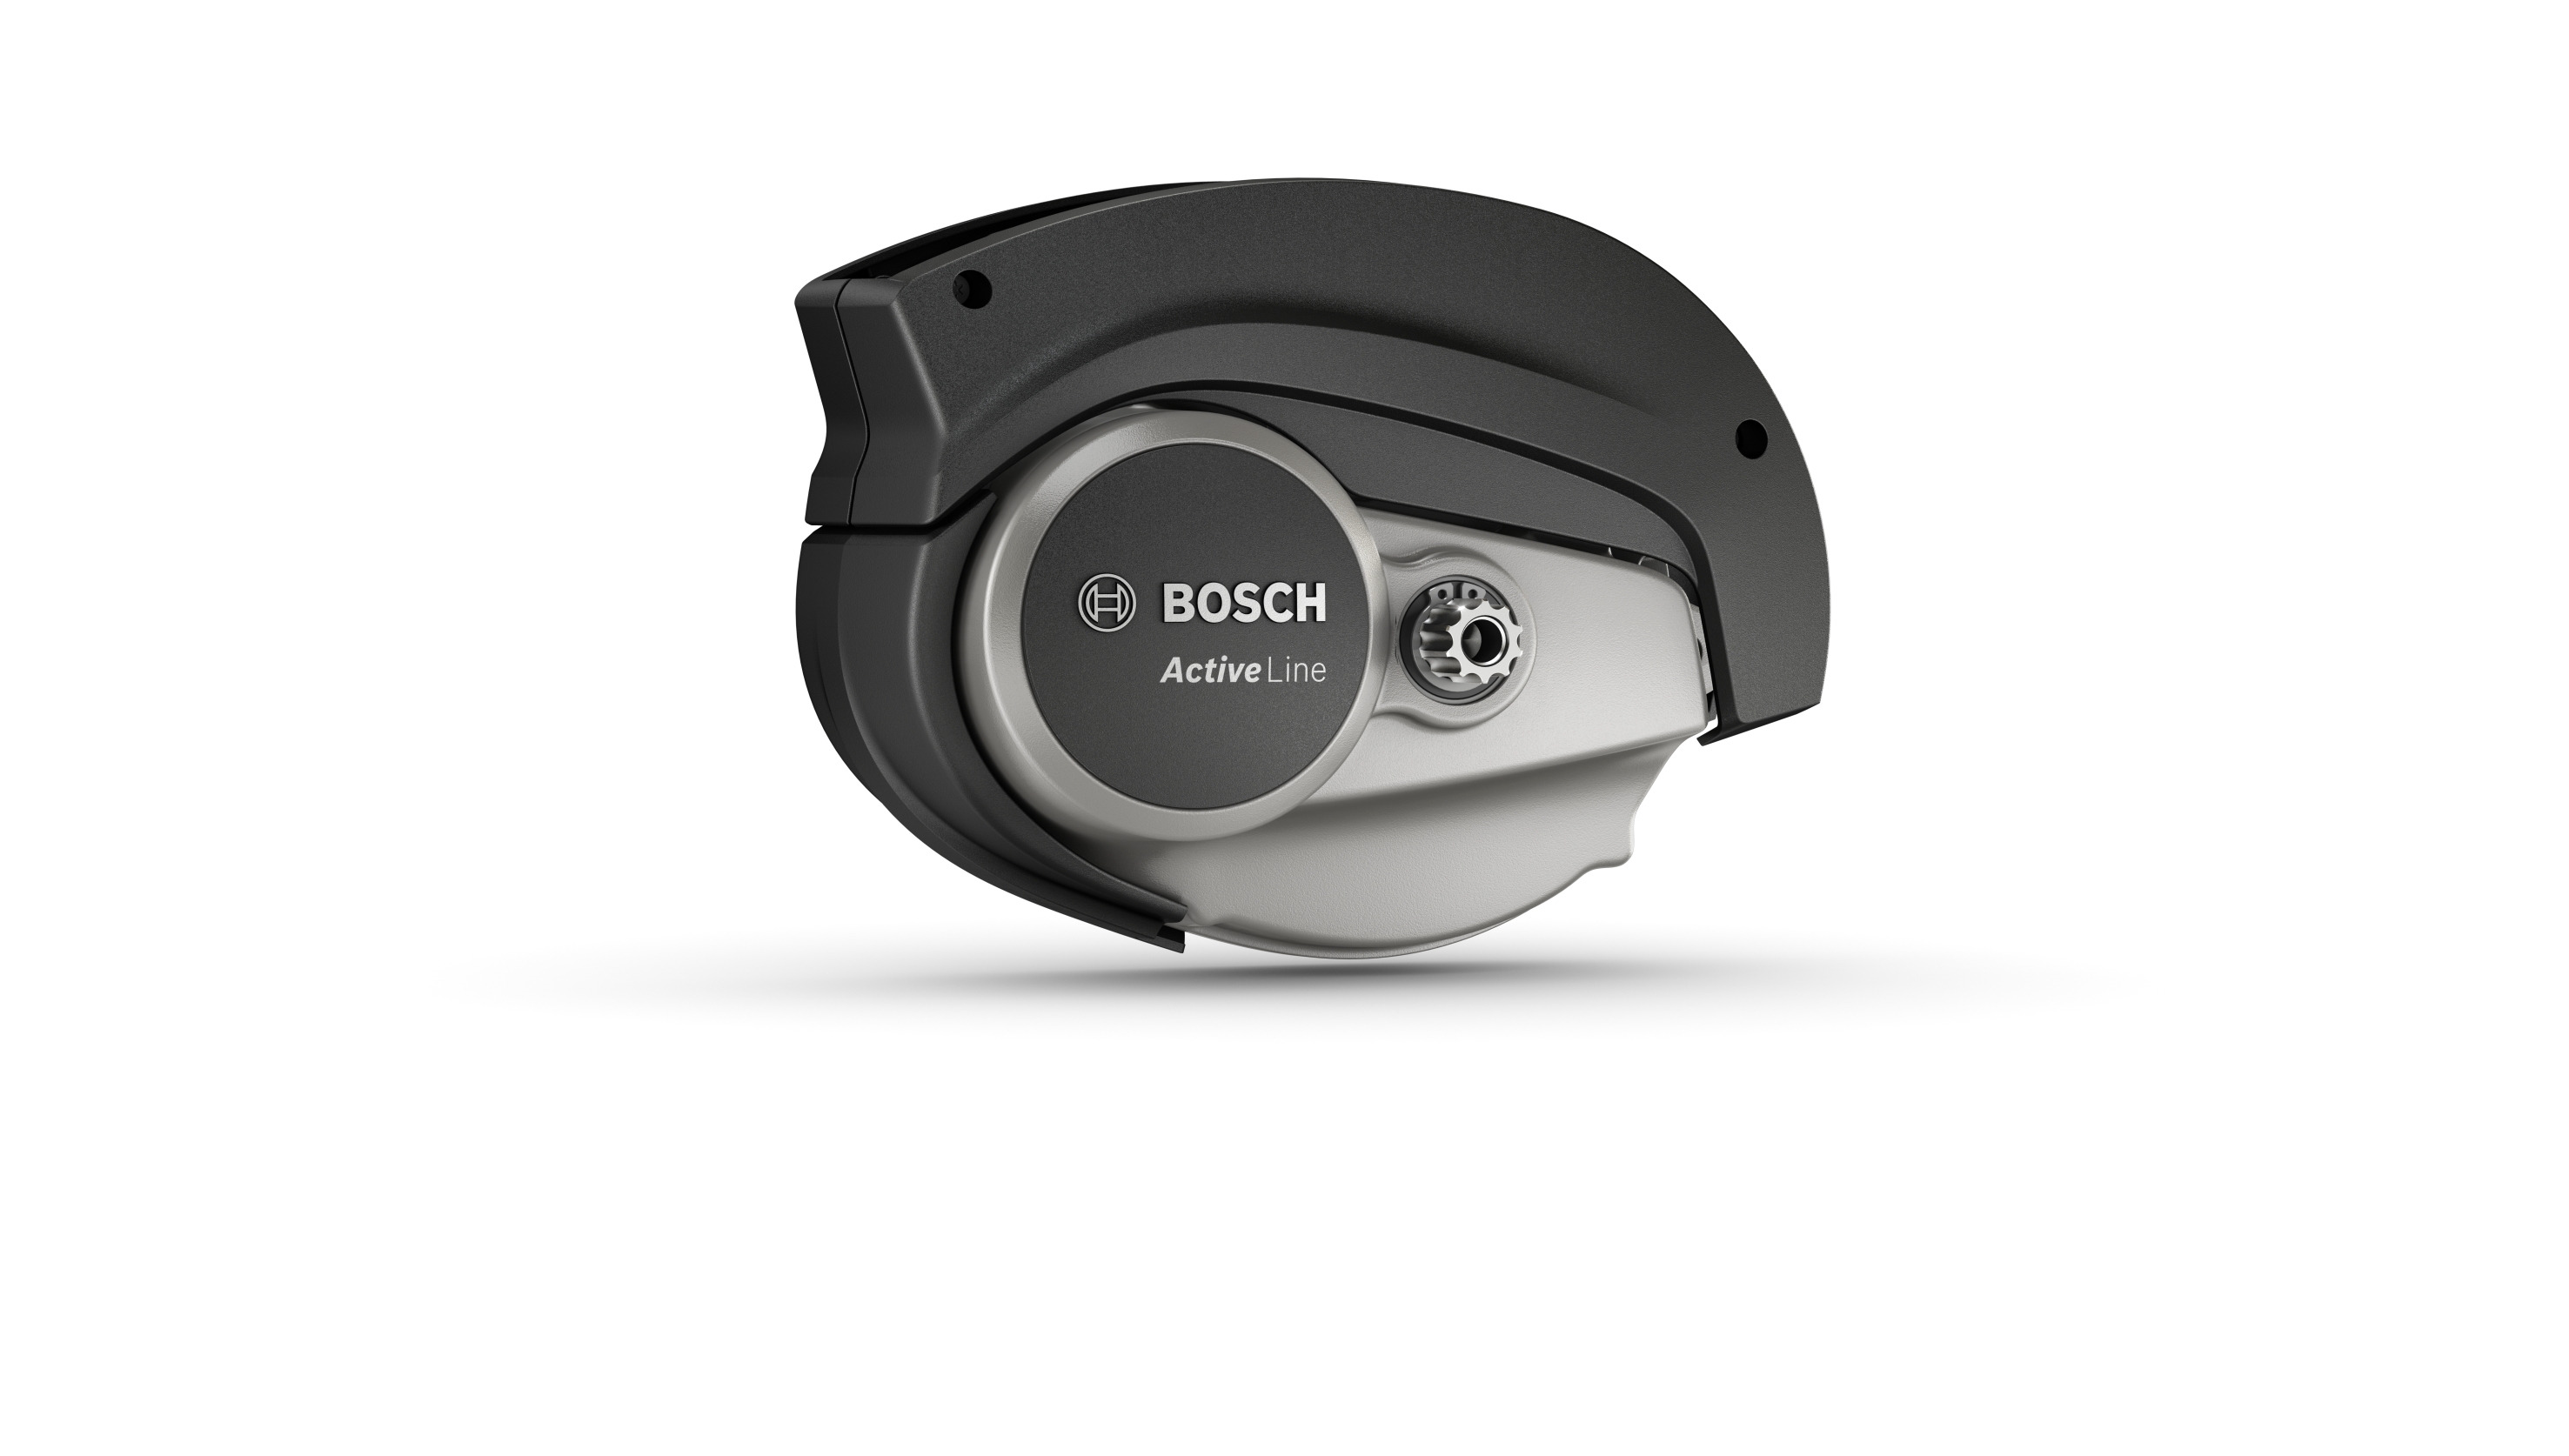 The new Bosch Active Line is targeted primarily at urban users and occasional eBikers. The quiet drive unit provides eBikers with support in moderate stages, which makes it ideal for everyday use. 